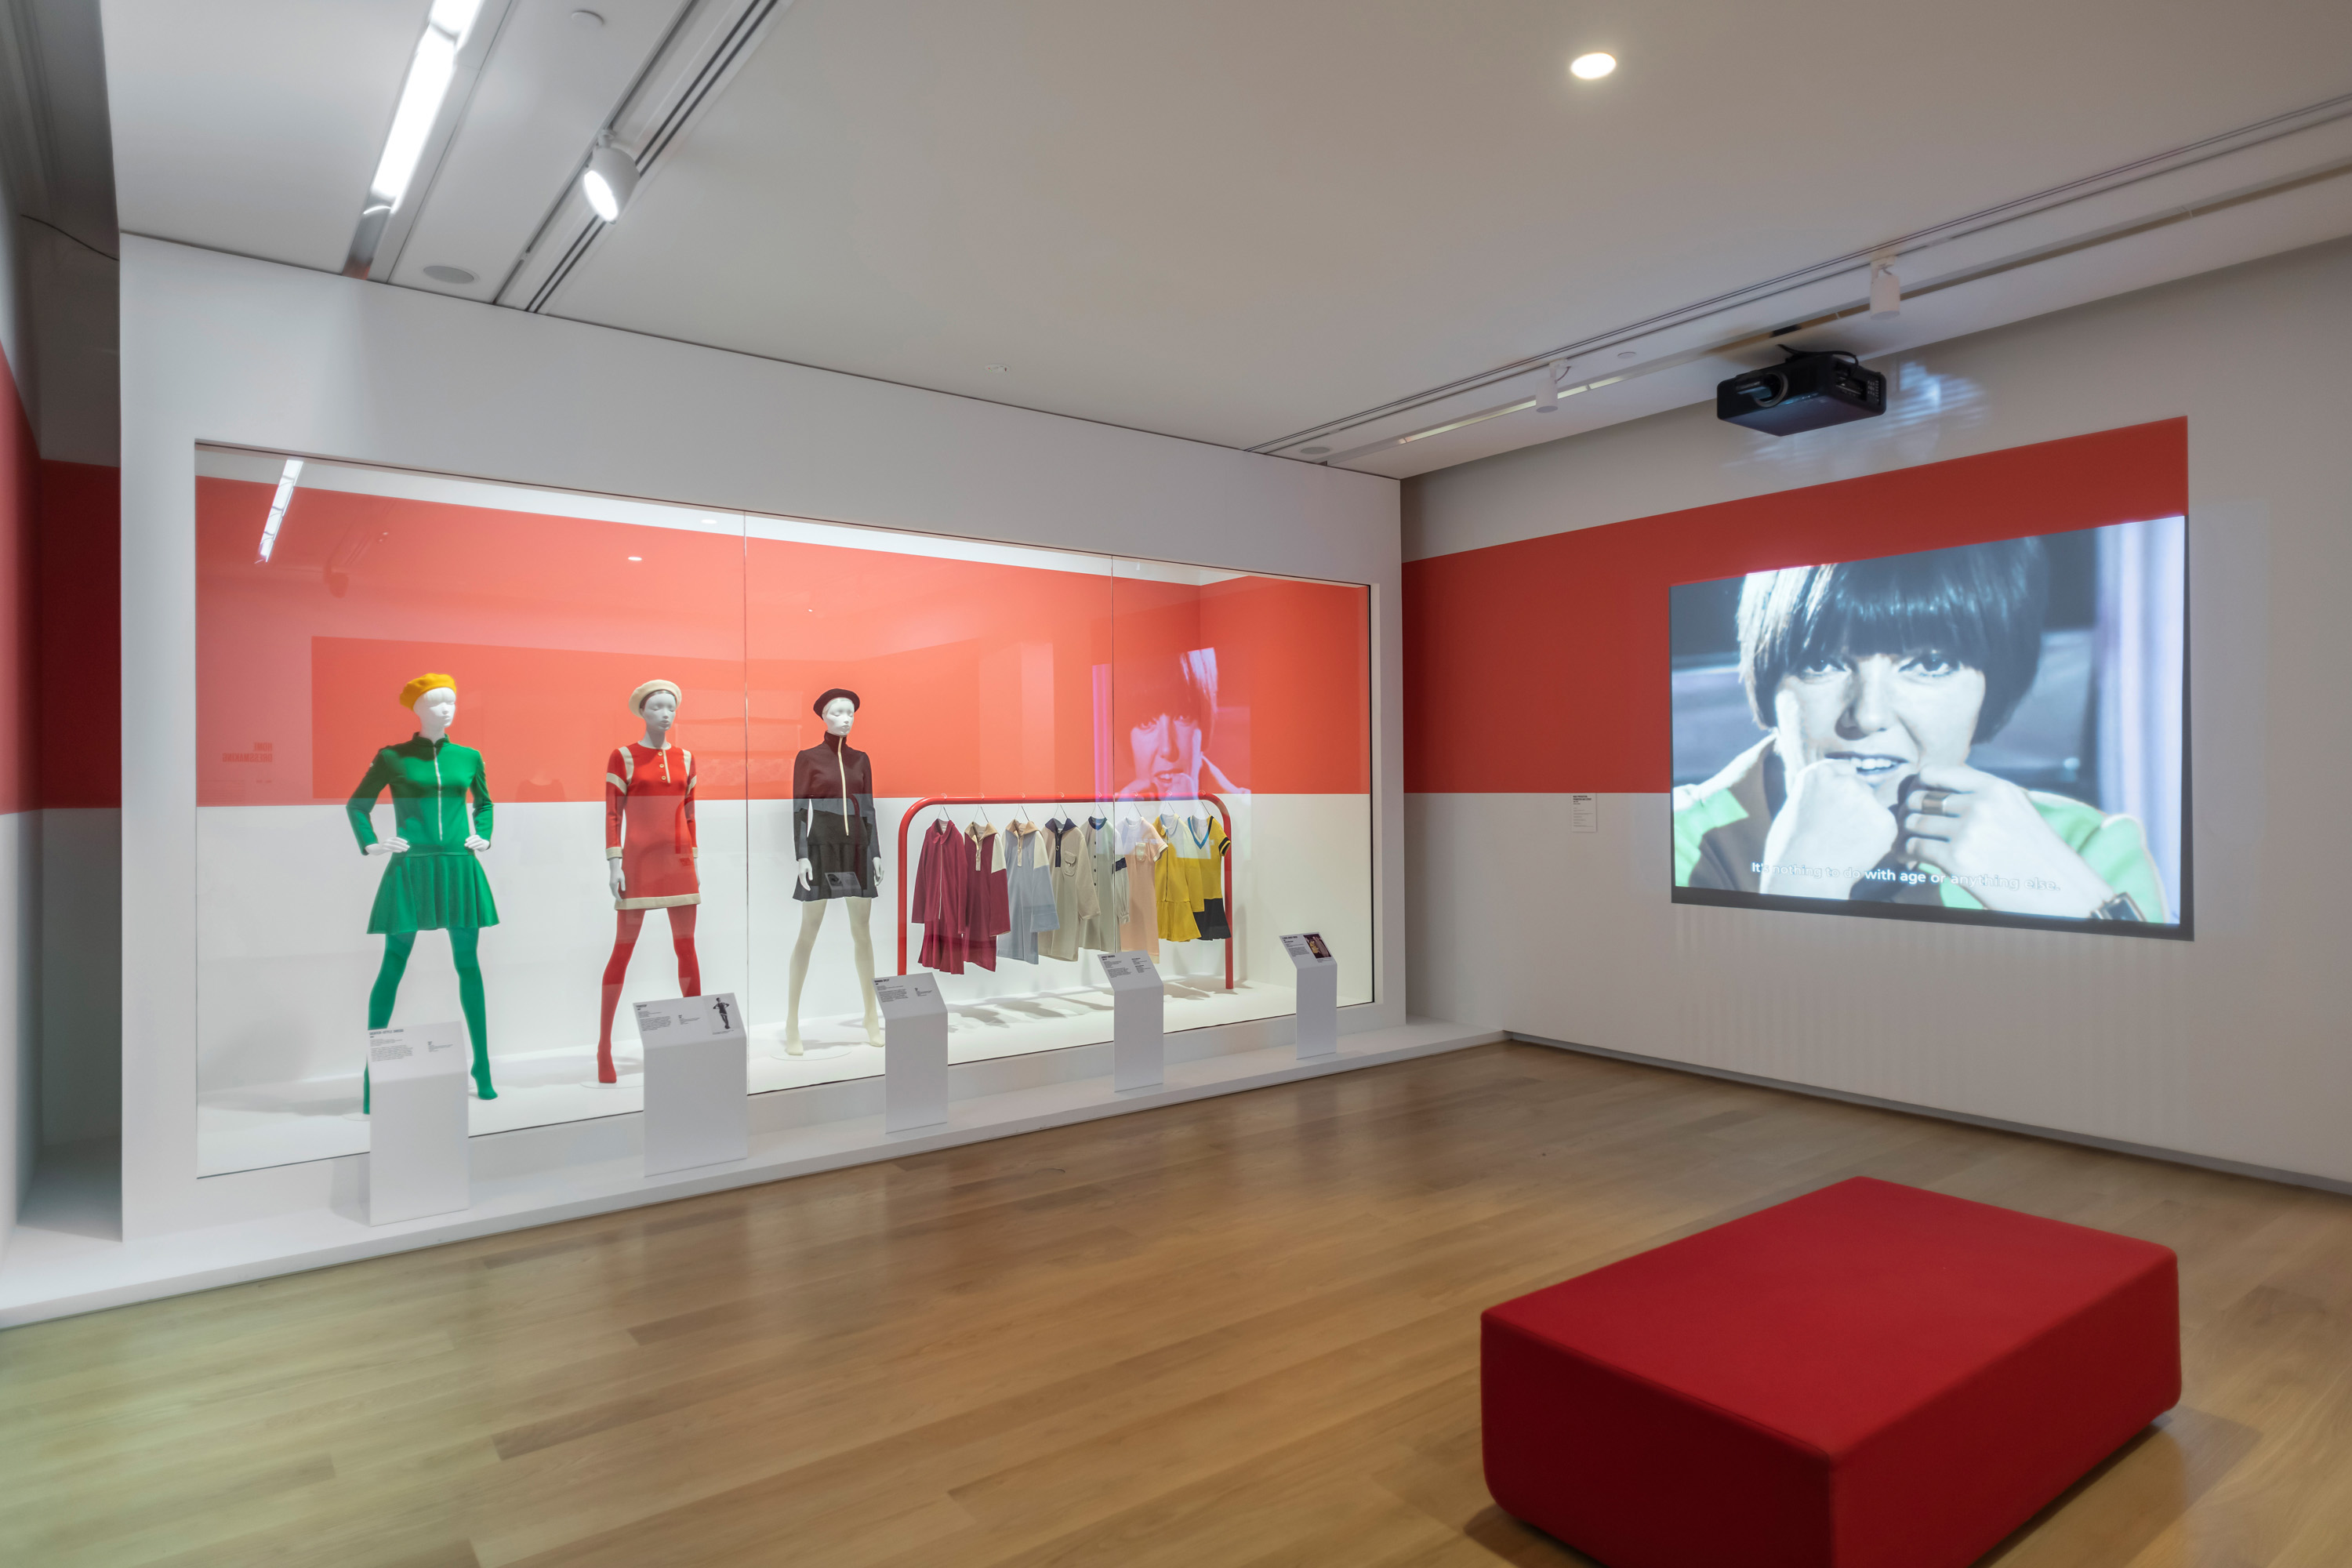 Mary Quant: The designer who changed fashion – New Zealand Arts Review